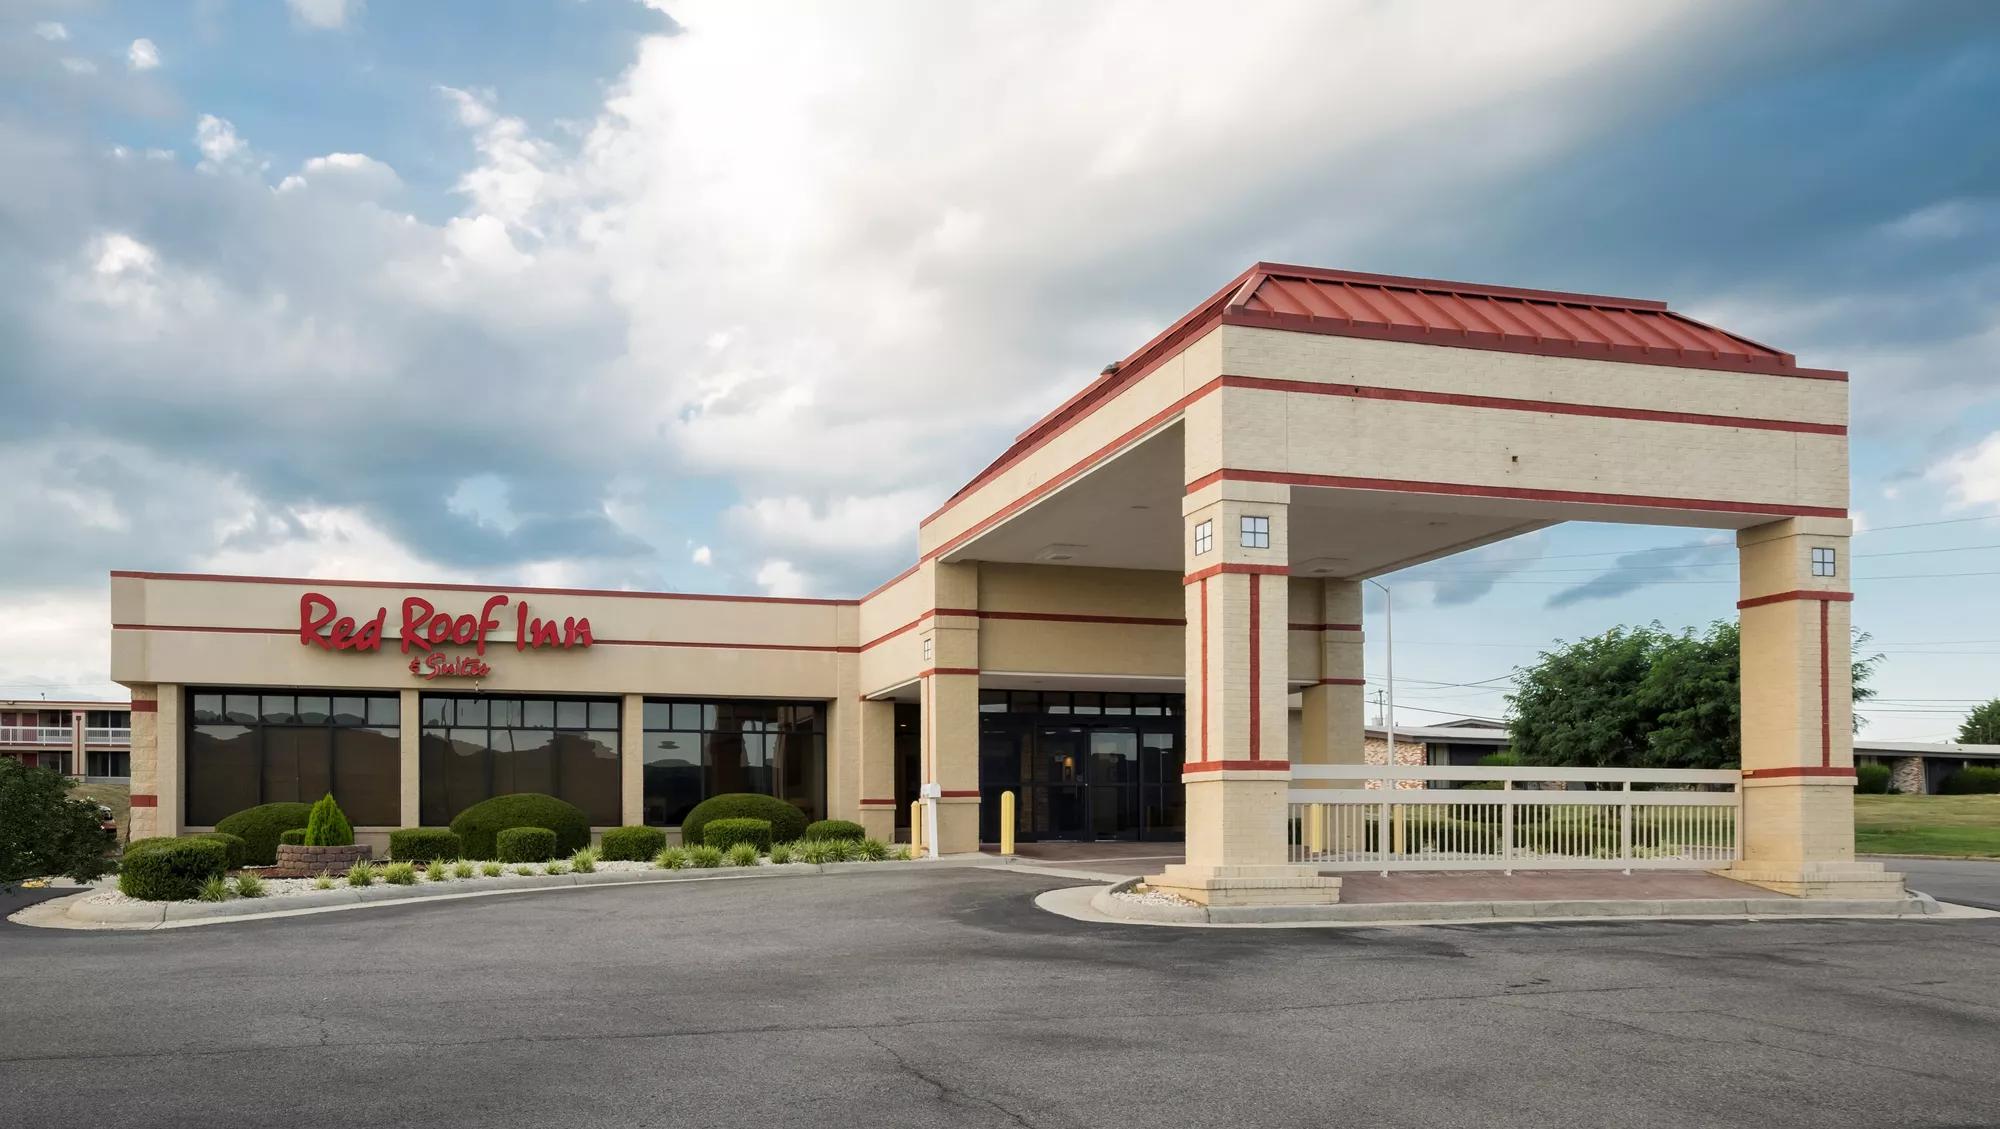 Red Roof Inn & Suites Wytheville Property Exterior Image